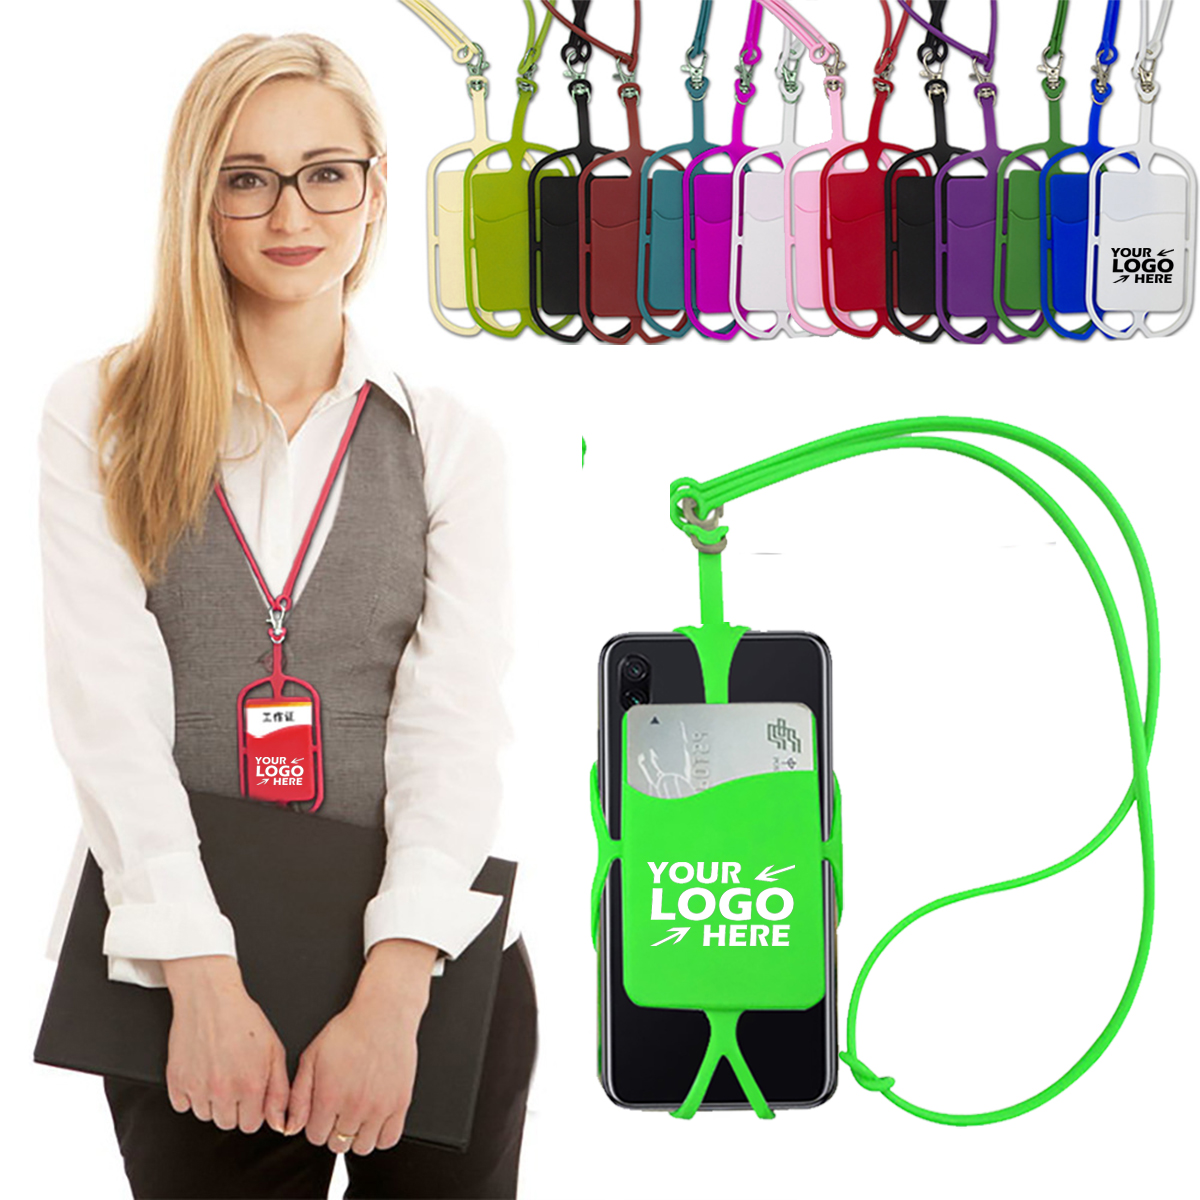 GL-SVH1018 Silicone Cellphone Lanyard